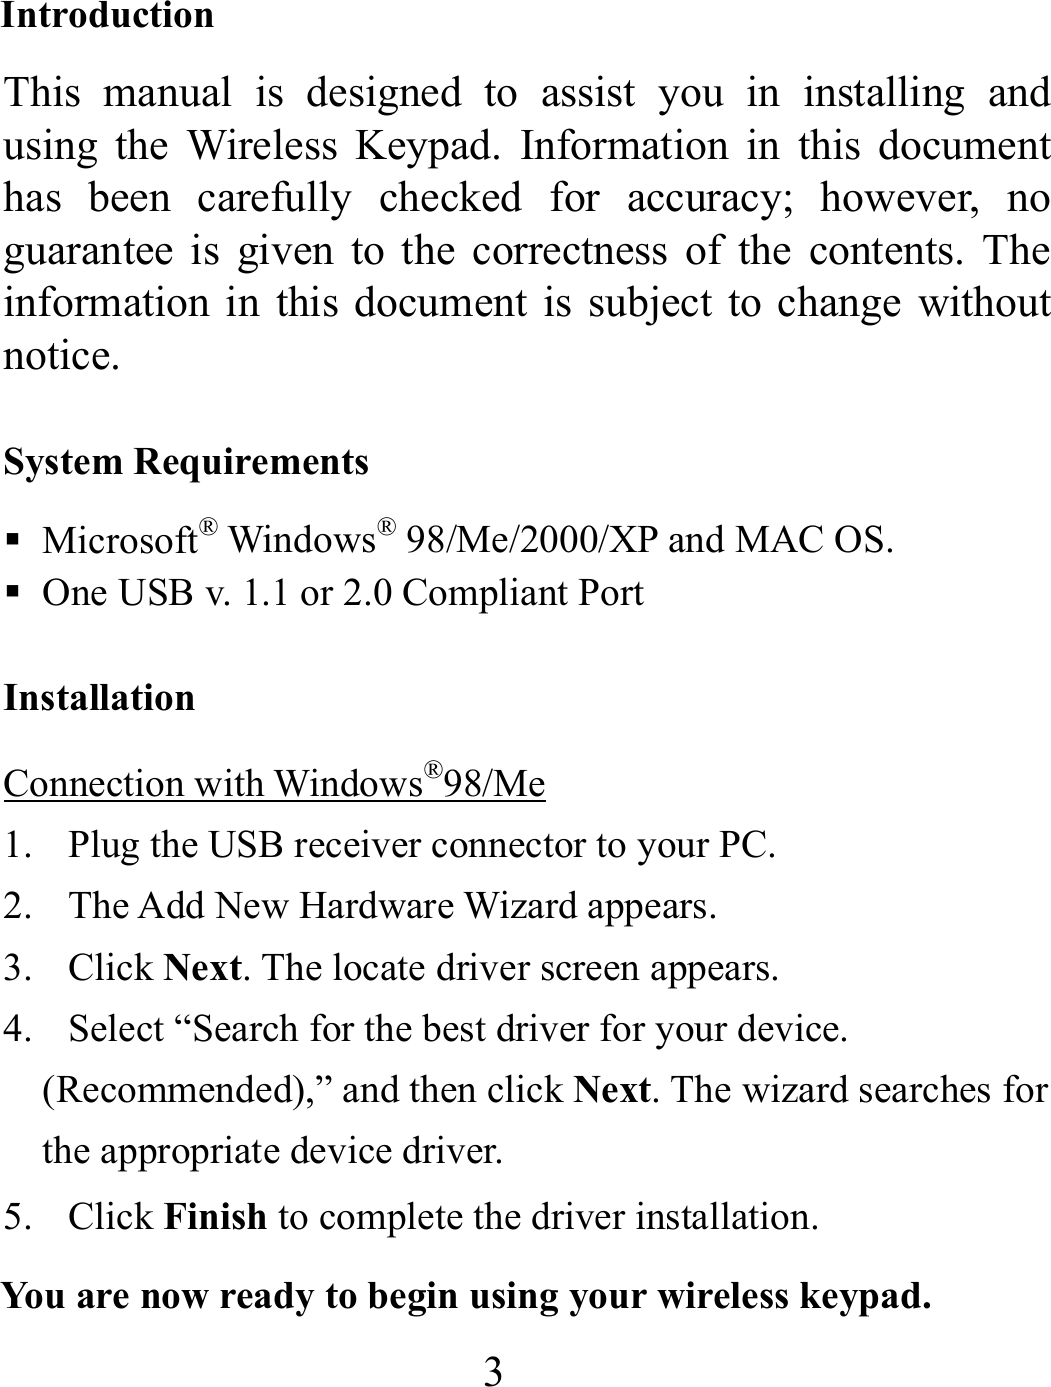 3 Introduction This manual is designed to assist you in installing and using the Wireless Keypad. Information in this document has been carefully checked for accuracy; however, no guarantee is given to the correctness of the contents. The information in this document is subject to change without notice.  System Requirements  Microsoft® Windows® 98/Me/2000/XP and MAC OS.  One USB v. 1.1 or 2.0 Compliant Port Installation Connection with Windows®98/Me 1. Plug the USB receiver connector to your PC. 2. The Add New Hardware Wizard appears. 3. Click Next. The locate driver screen appears. 4. Select “Search for the best driver for your device.     (Recommended),” and then click Next. The wizard searches for the appropriate device driver. 5. Click Finish to complete the driver installation.   You are now ready to begin using your wireless keypad. 